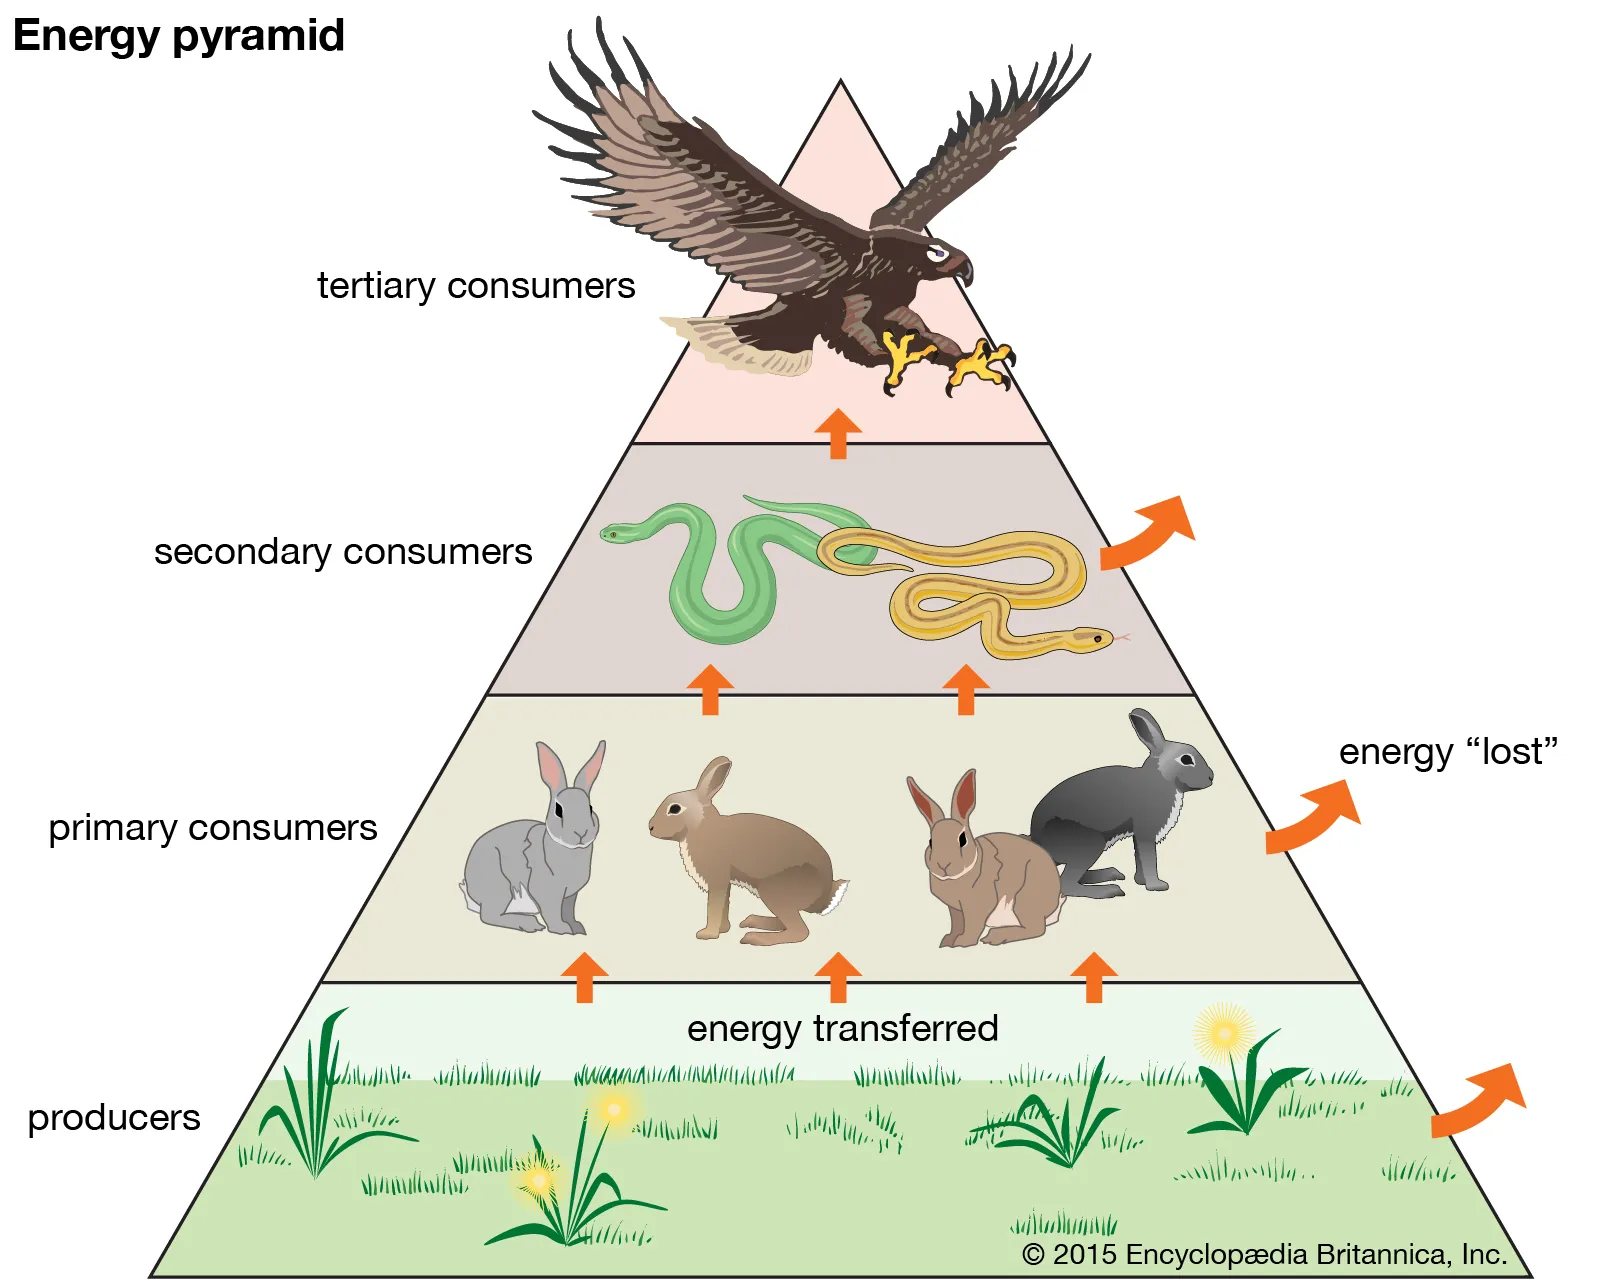 <p>-quaternary consumers (carnivores)</p><p>-tertiary consumers (carnivores)</p><p>-secondary consumers (carnivores)</p><p>-primary consumers (herbivores)</p><p>-primary producers (plants)</p>